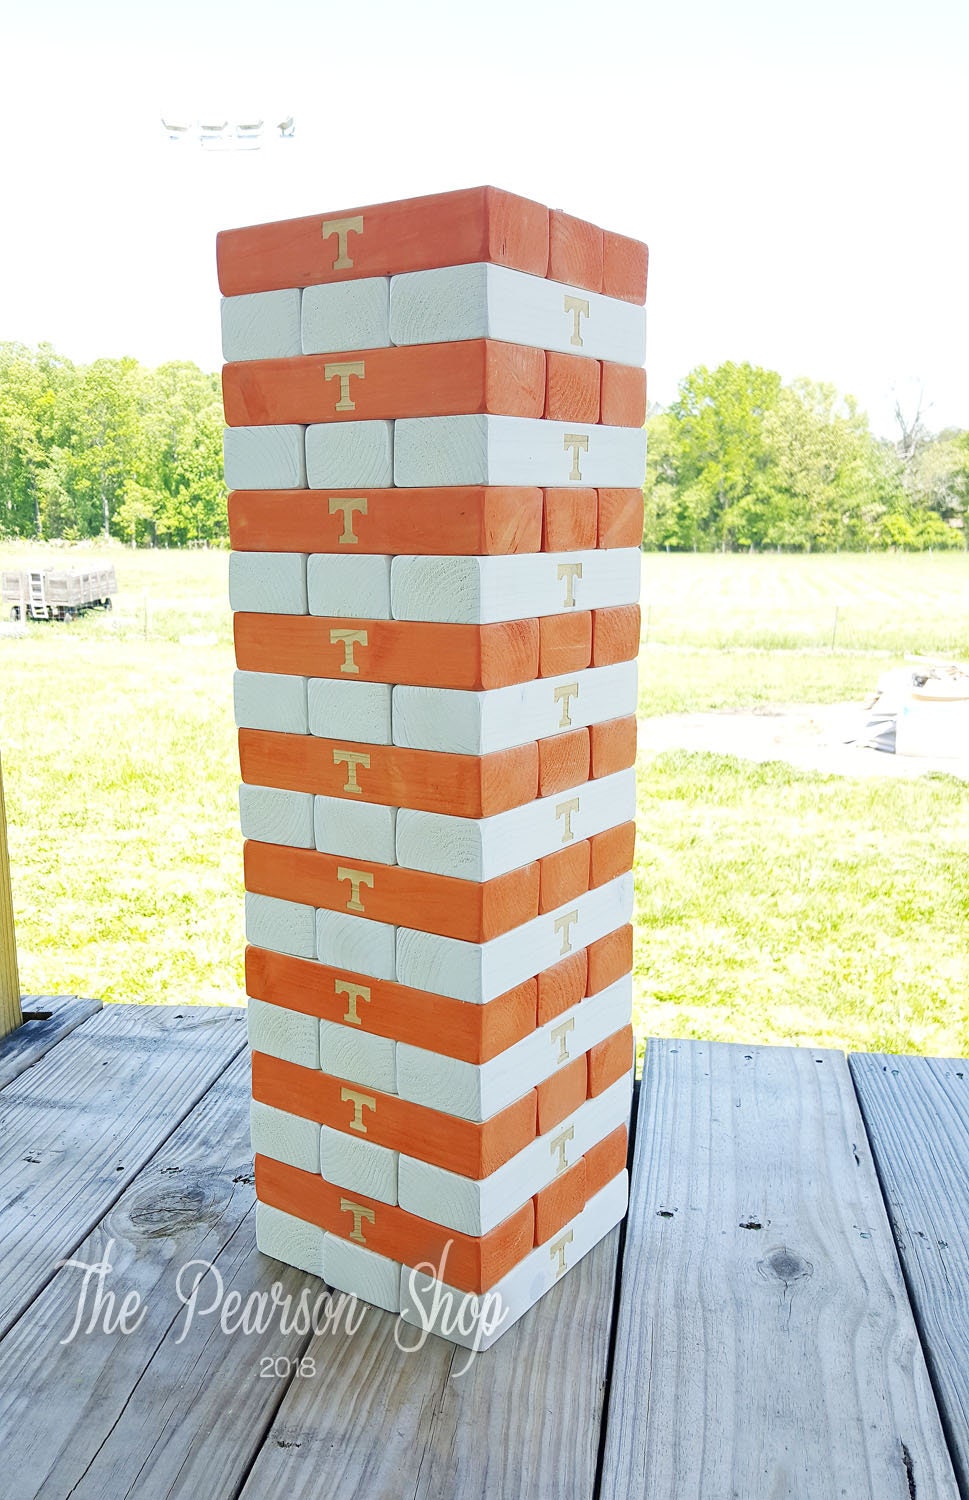 JR Tower Colored and/or Engraved Game